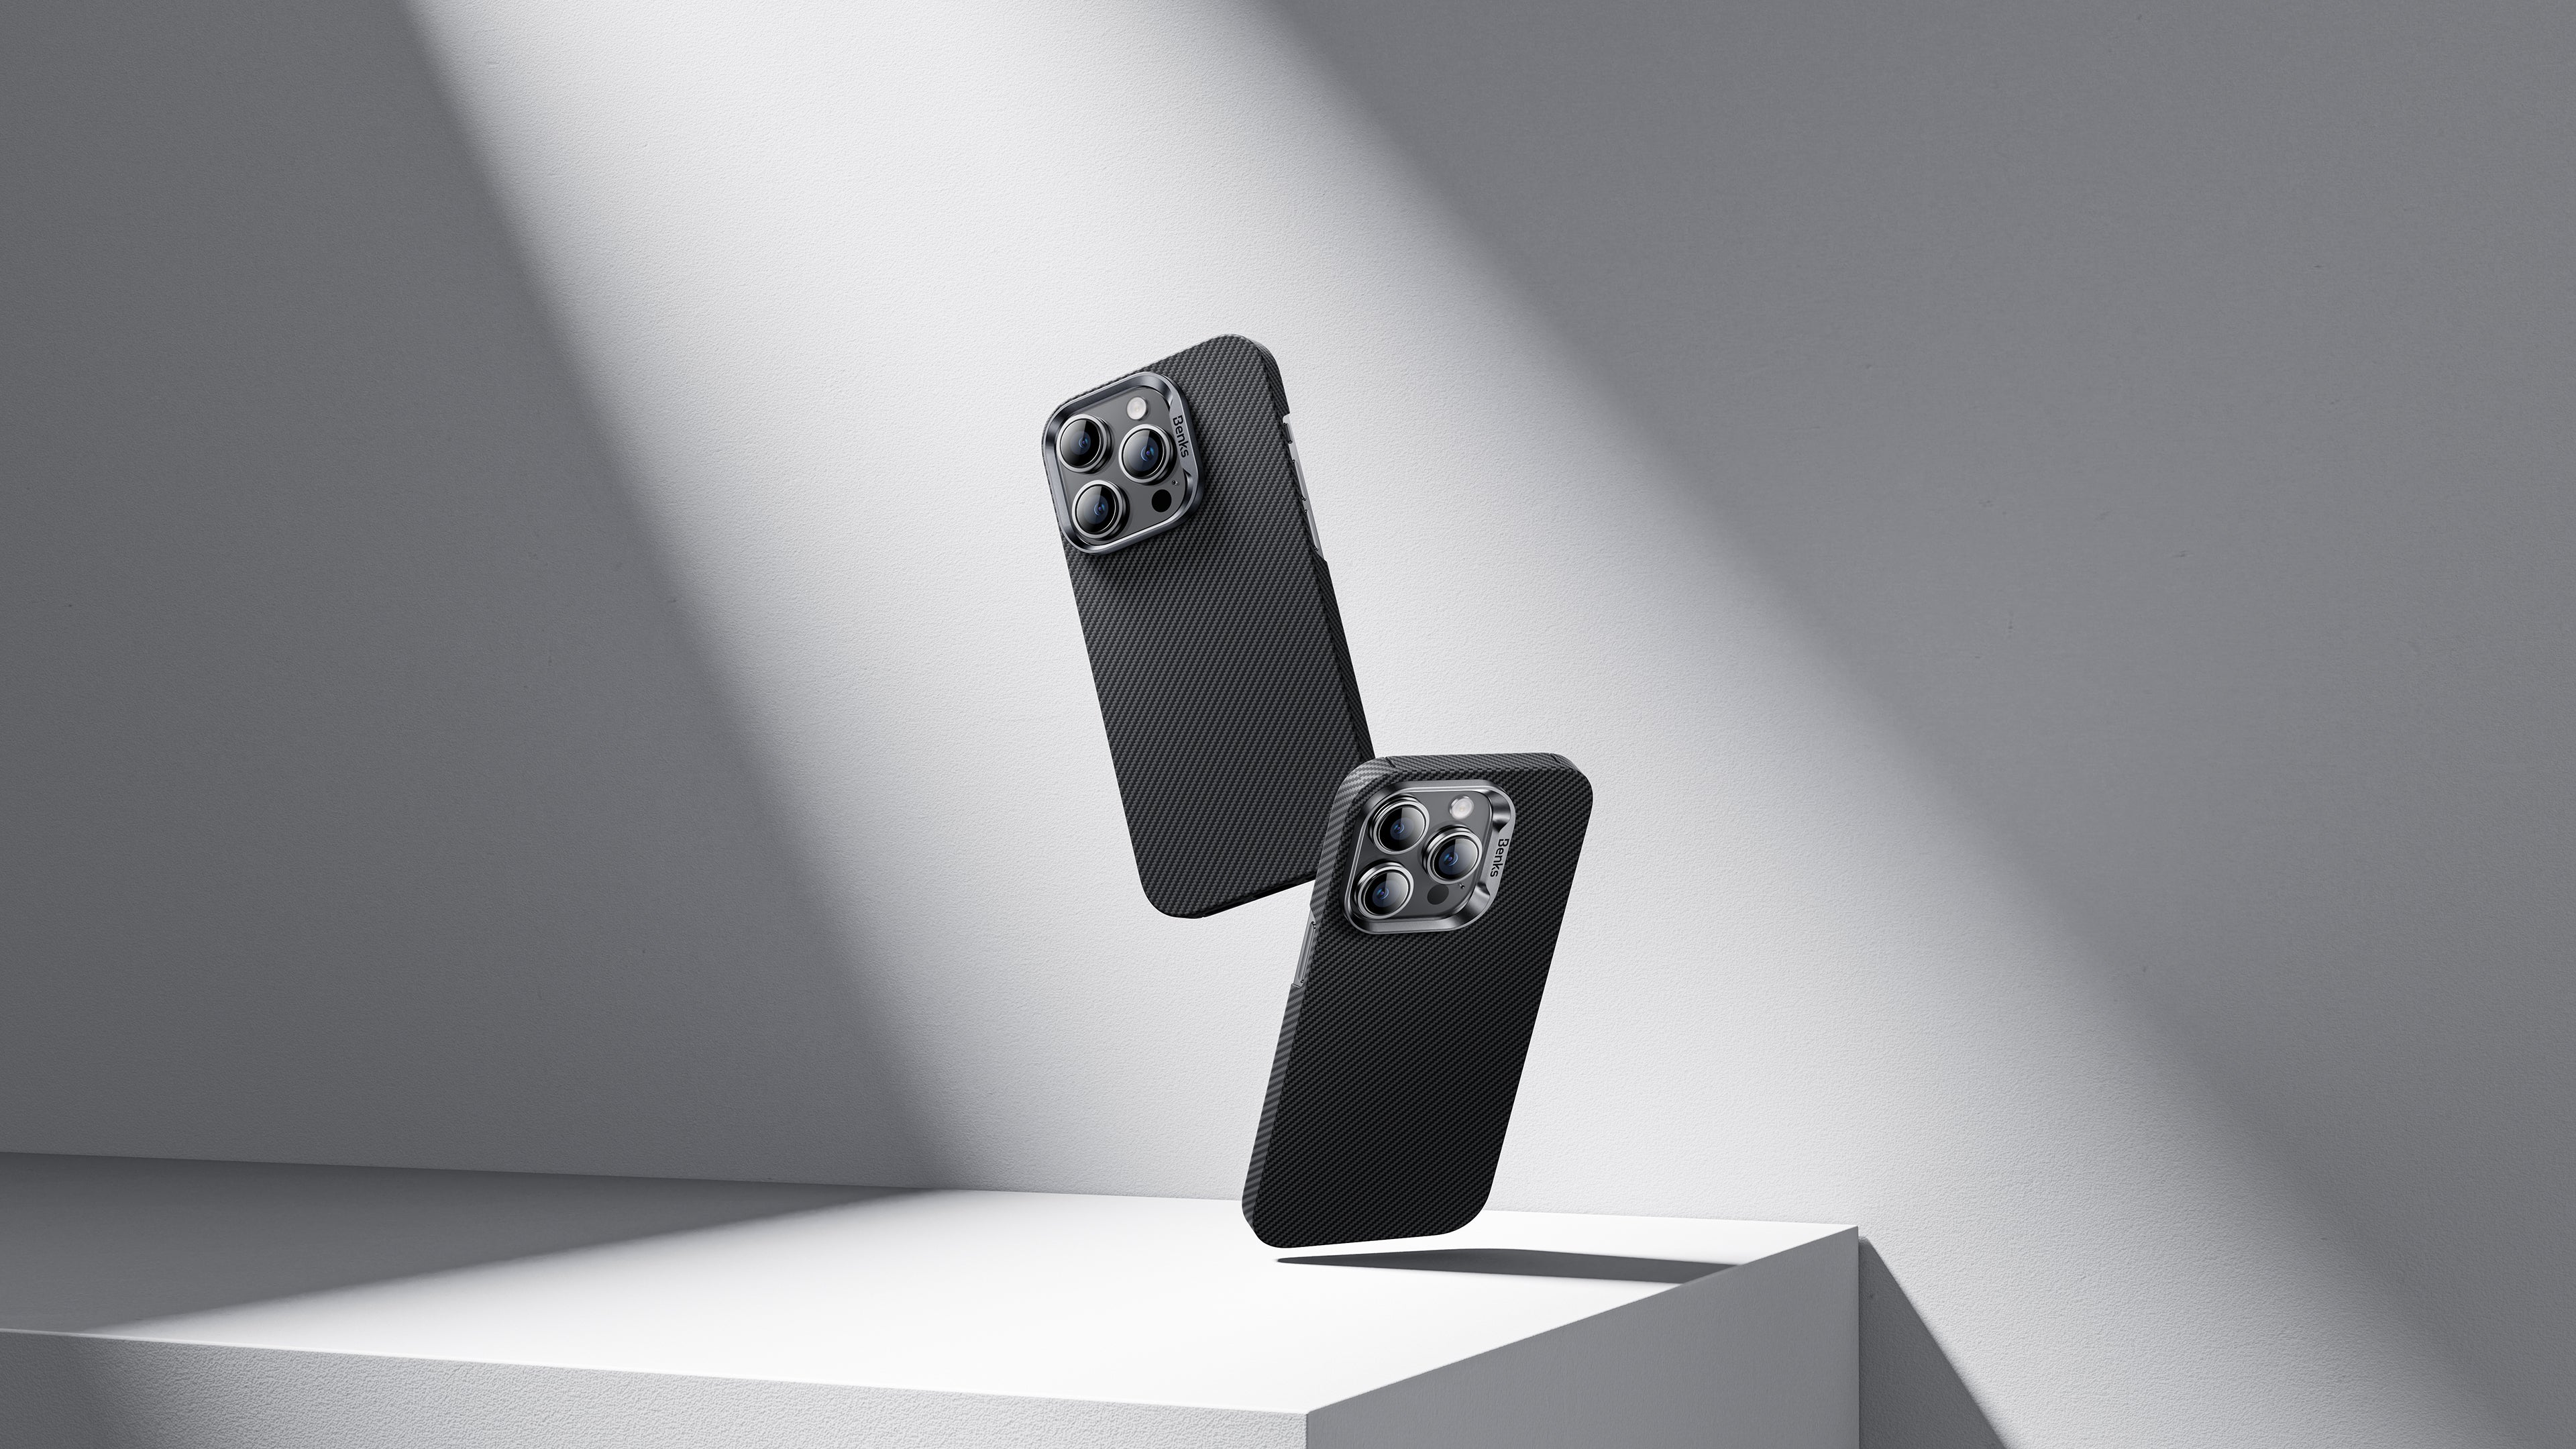 Two black iPhone 16 cases displayed in a sleek, minimalistic environment. The image emphasizes design updates and highlights potential leaks about the new features of the upcoming iPhone 16, reflecting the latest trends and technological advancements.